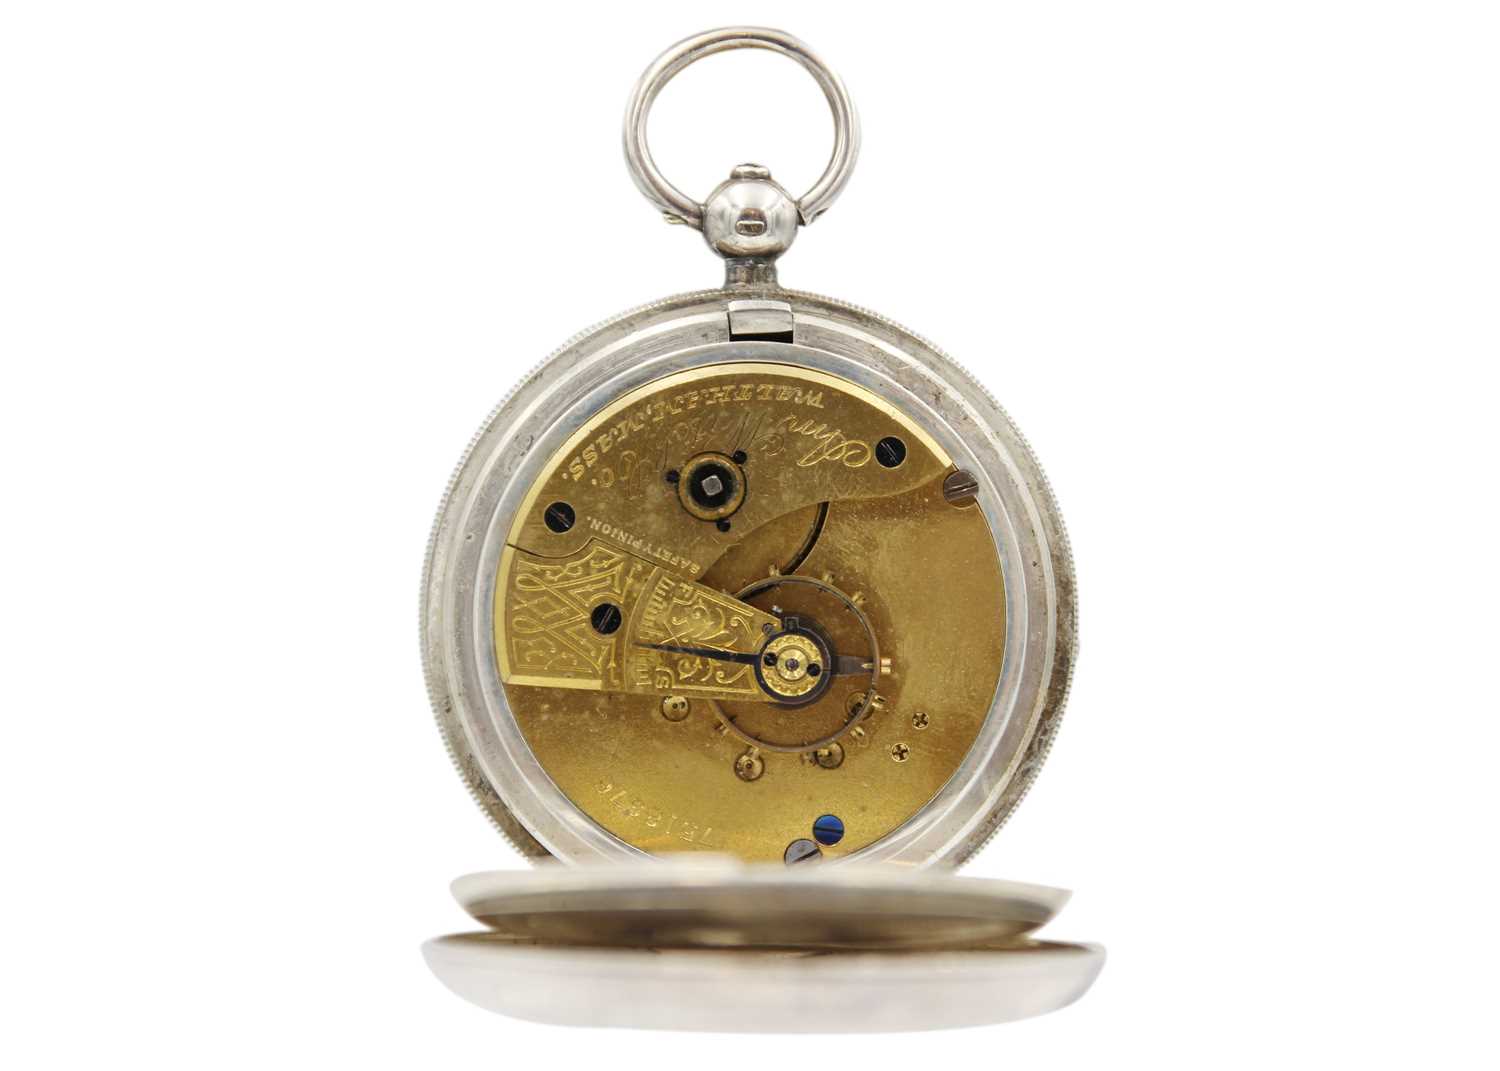 Two American Watch Co. Waltham silver-cased key wind pocket watches. - Image 3 of 7